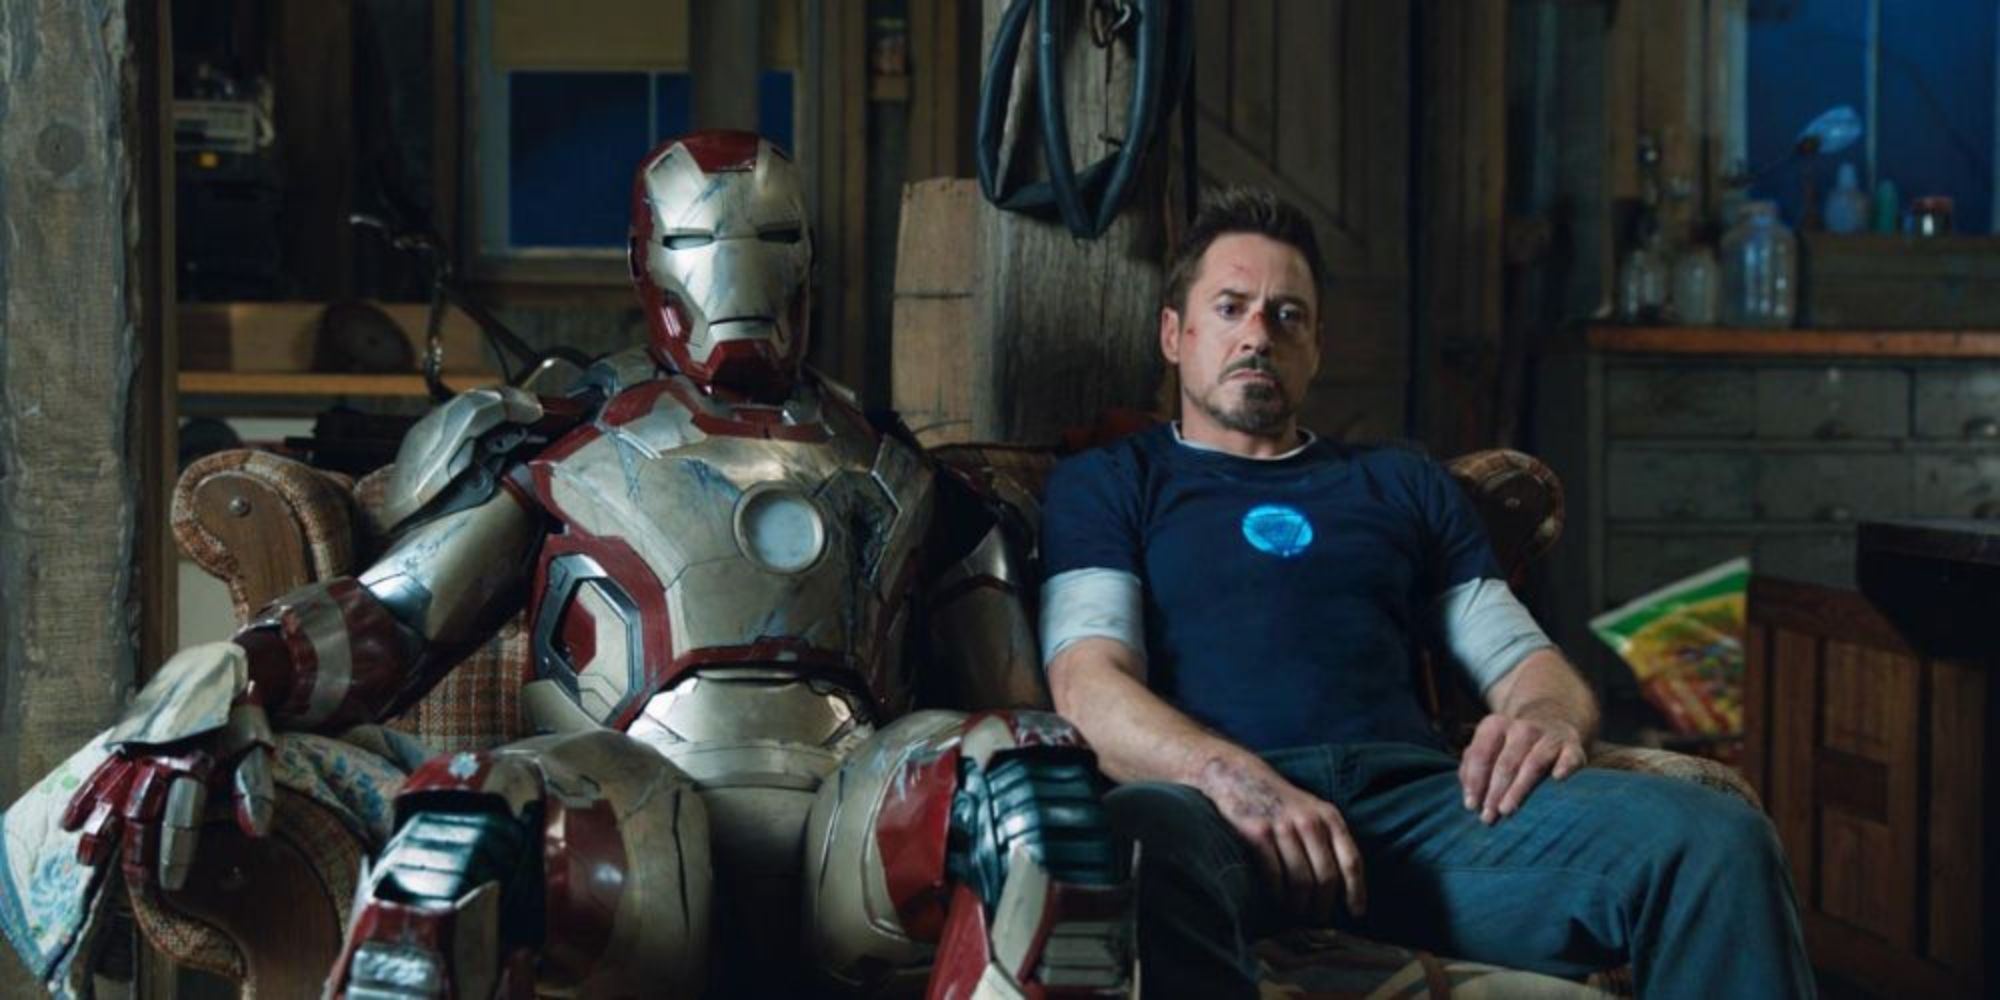 Tony Stark sitting on couch with malfunctioned suit